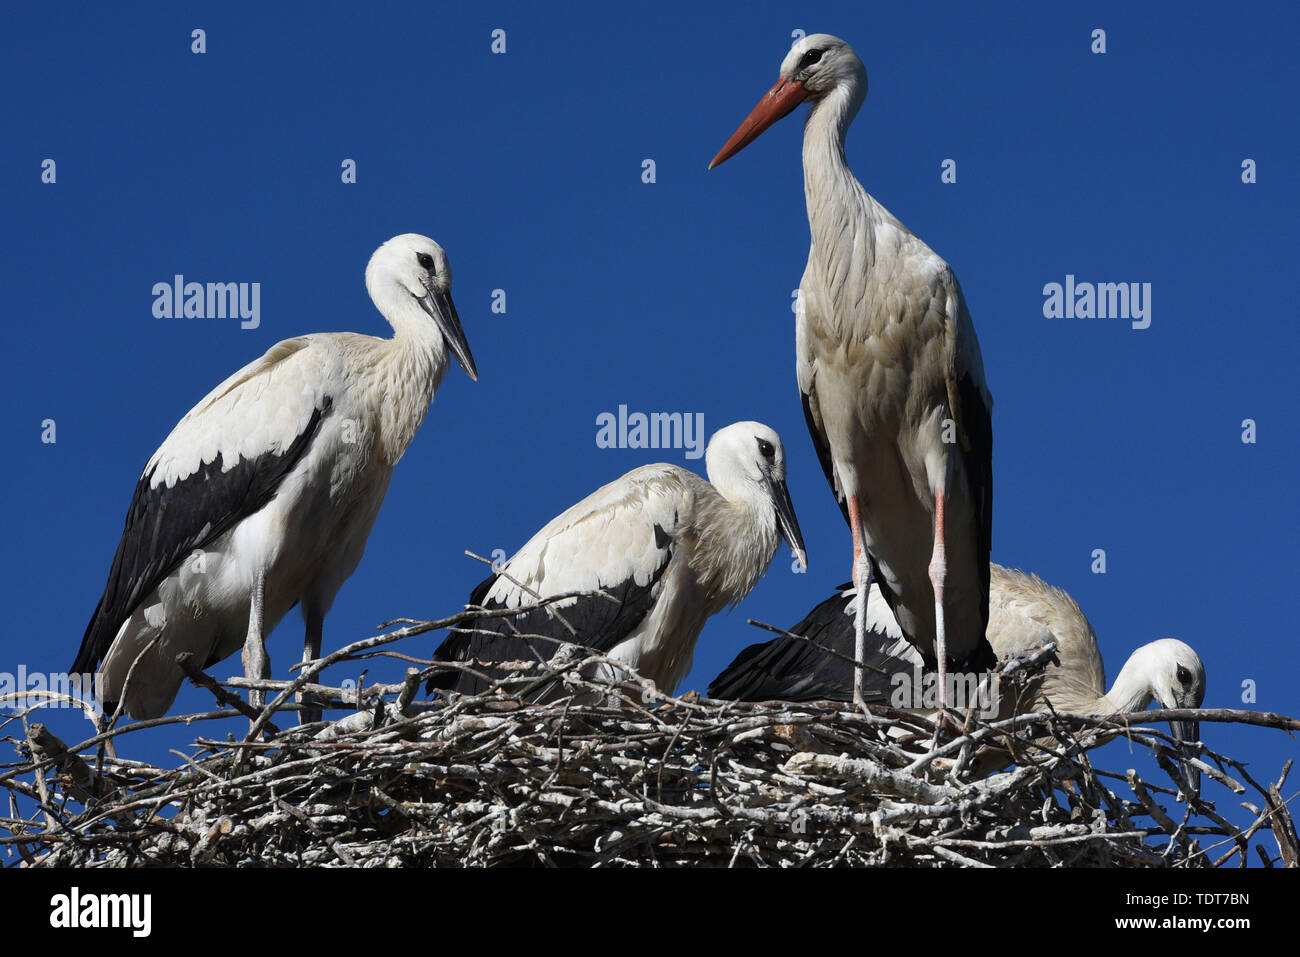 Madrid, Spain. 18th June, 2019. Young white storks are seen with an adult stork in their nest in Madrid.The number of white stork chicks born in their nests at Madrid zoo has increased considerably in the last decade due to availability of food. Credit: John Milner/SOPA Images/ZUMA Wire/Alamy Live News Stock Photo